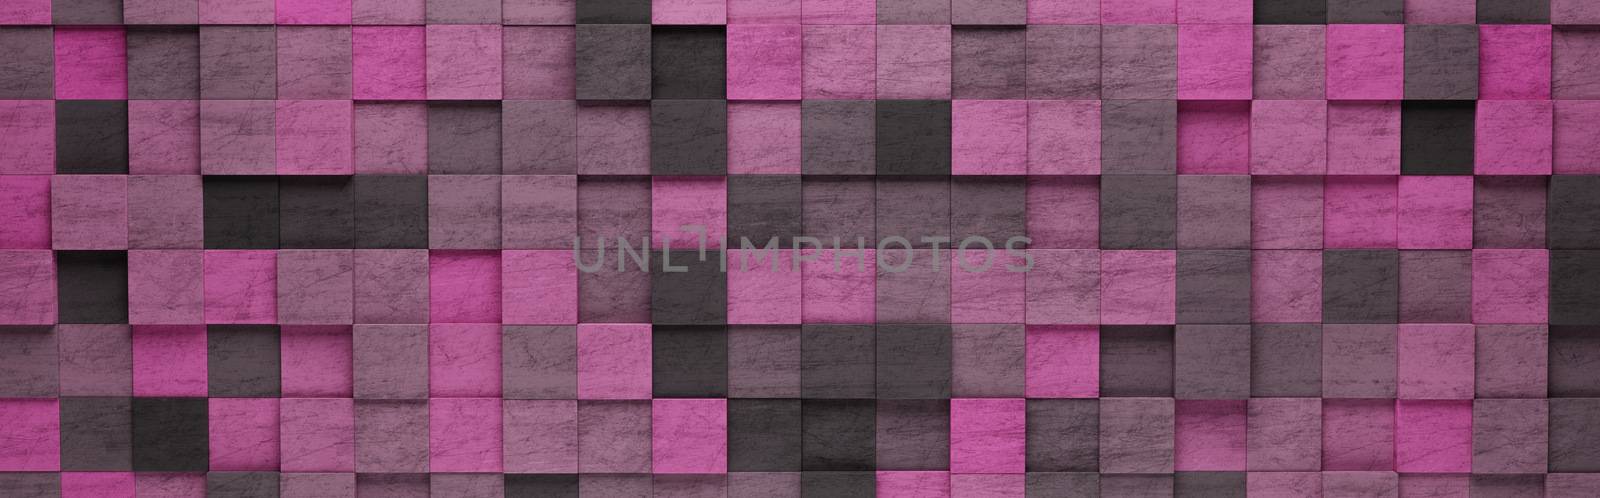 Wall of Purple Squares Tiles Arranged in Random Height 3D Pattern Background Illustration